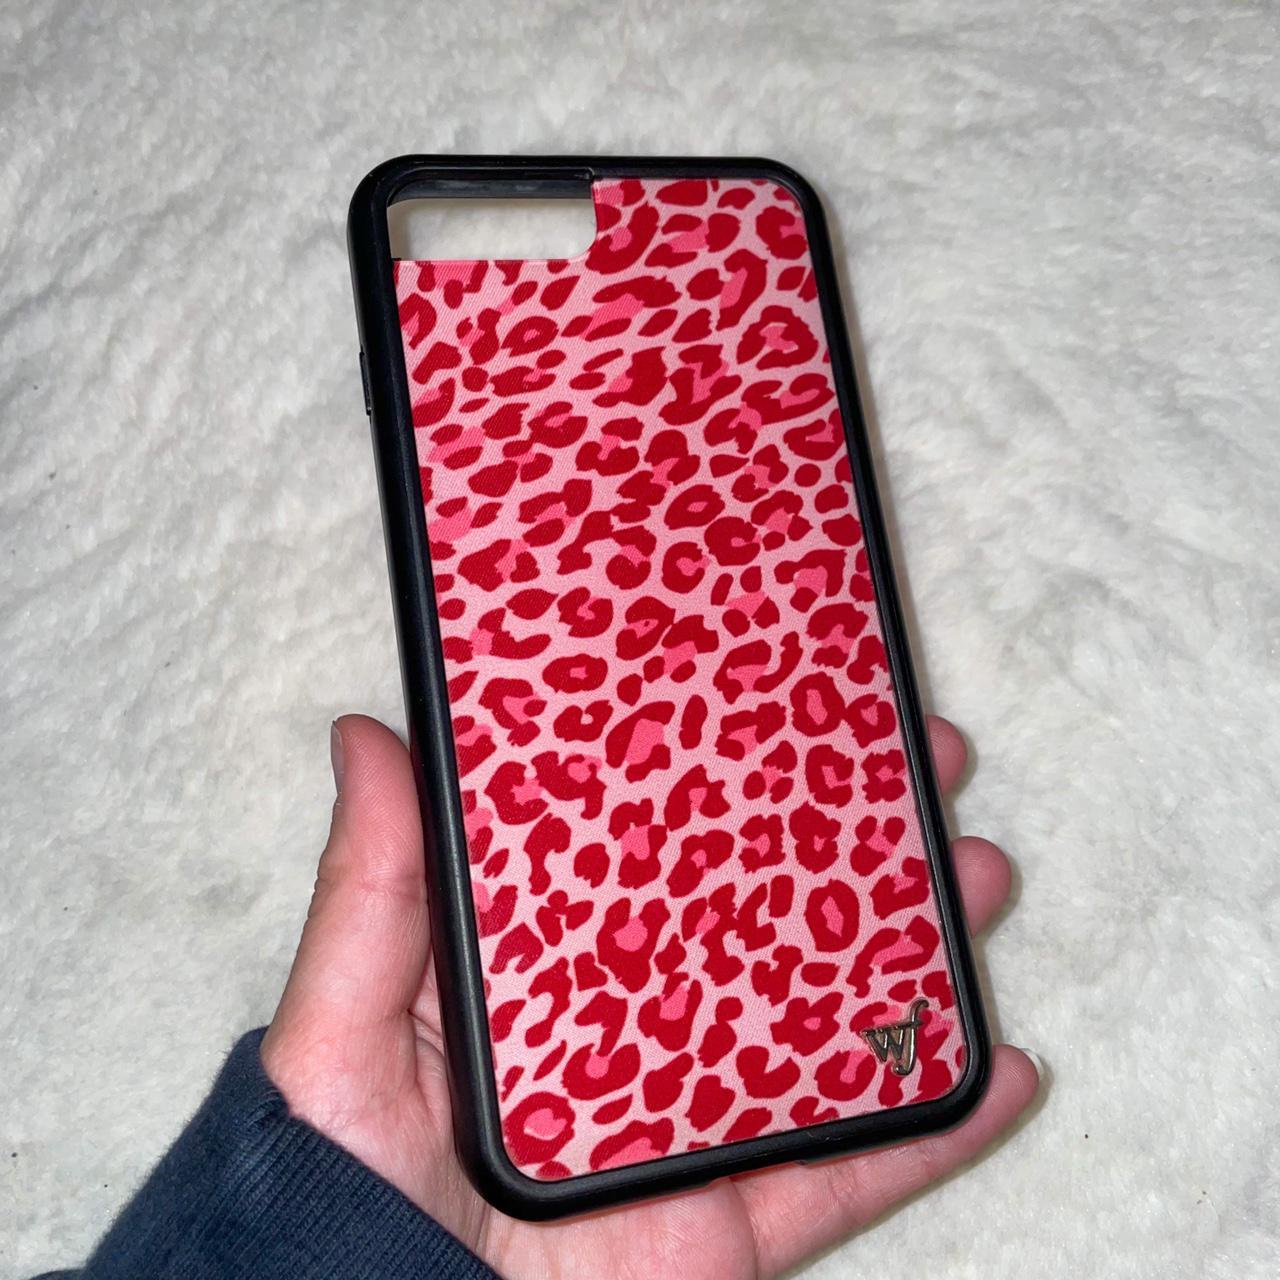 Product Image 3 - Wildflower pink cheetah phone case🌼

Adorable